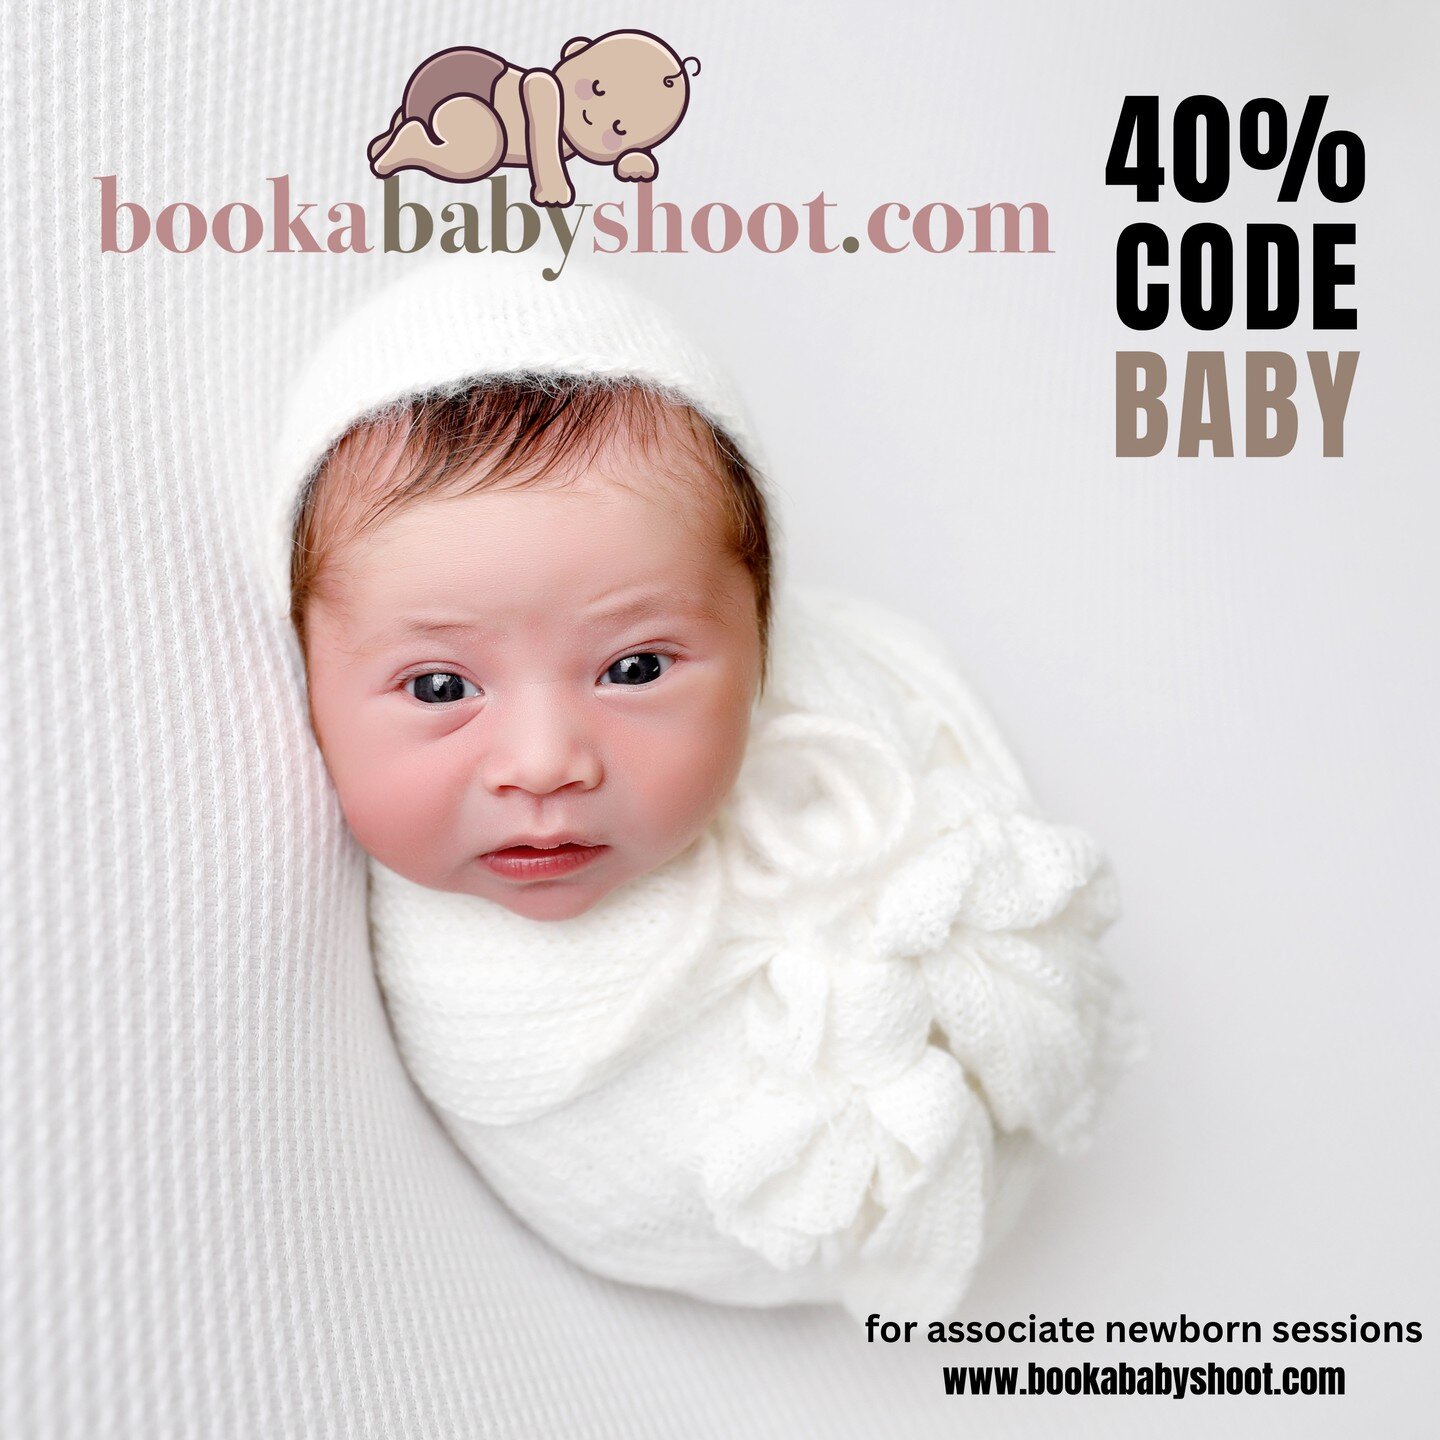 We love babies!

Save 40% off all newborn associate newborn sessions

purchase online www.bookababyshoot.com code baby

email us to find a photographer in your area!